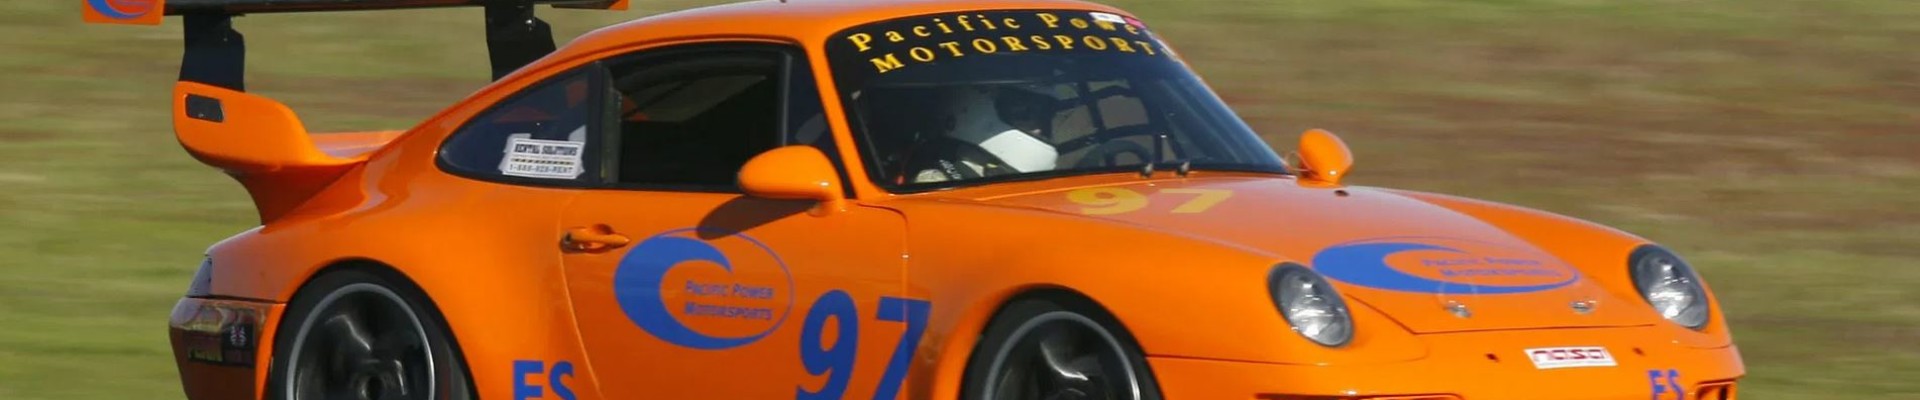 Porsche Repair near Oakland by Pacific Power Motorsports a leading Porsche repair shop in California specializing in Porsche repair, maintenance, performance tuning and service